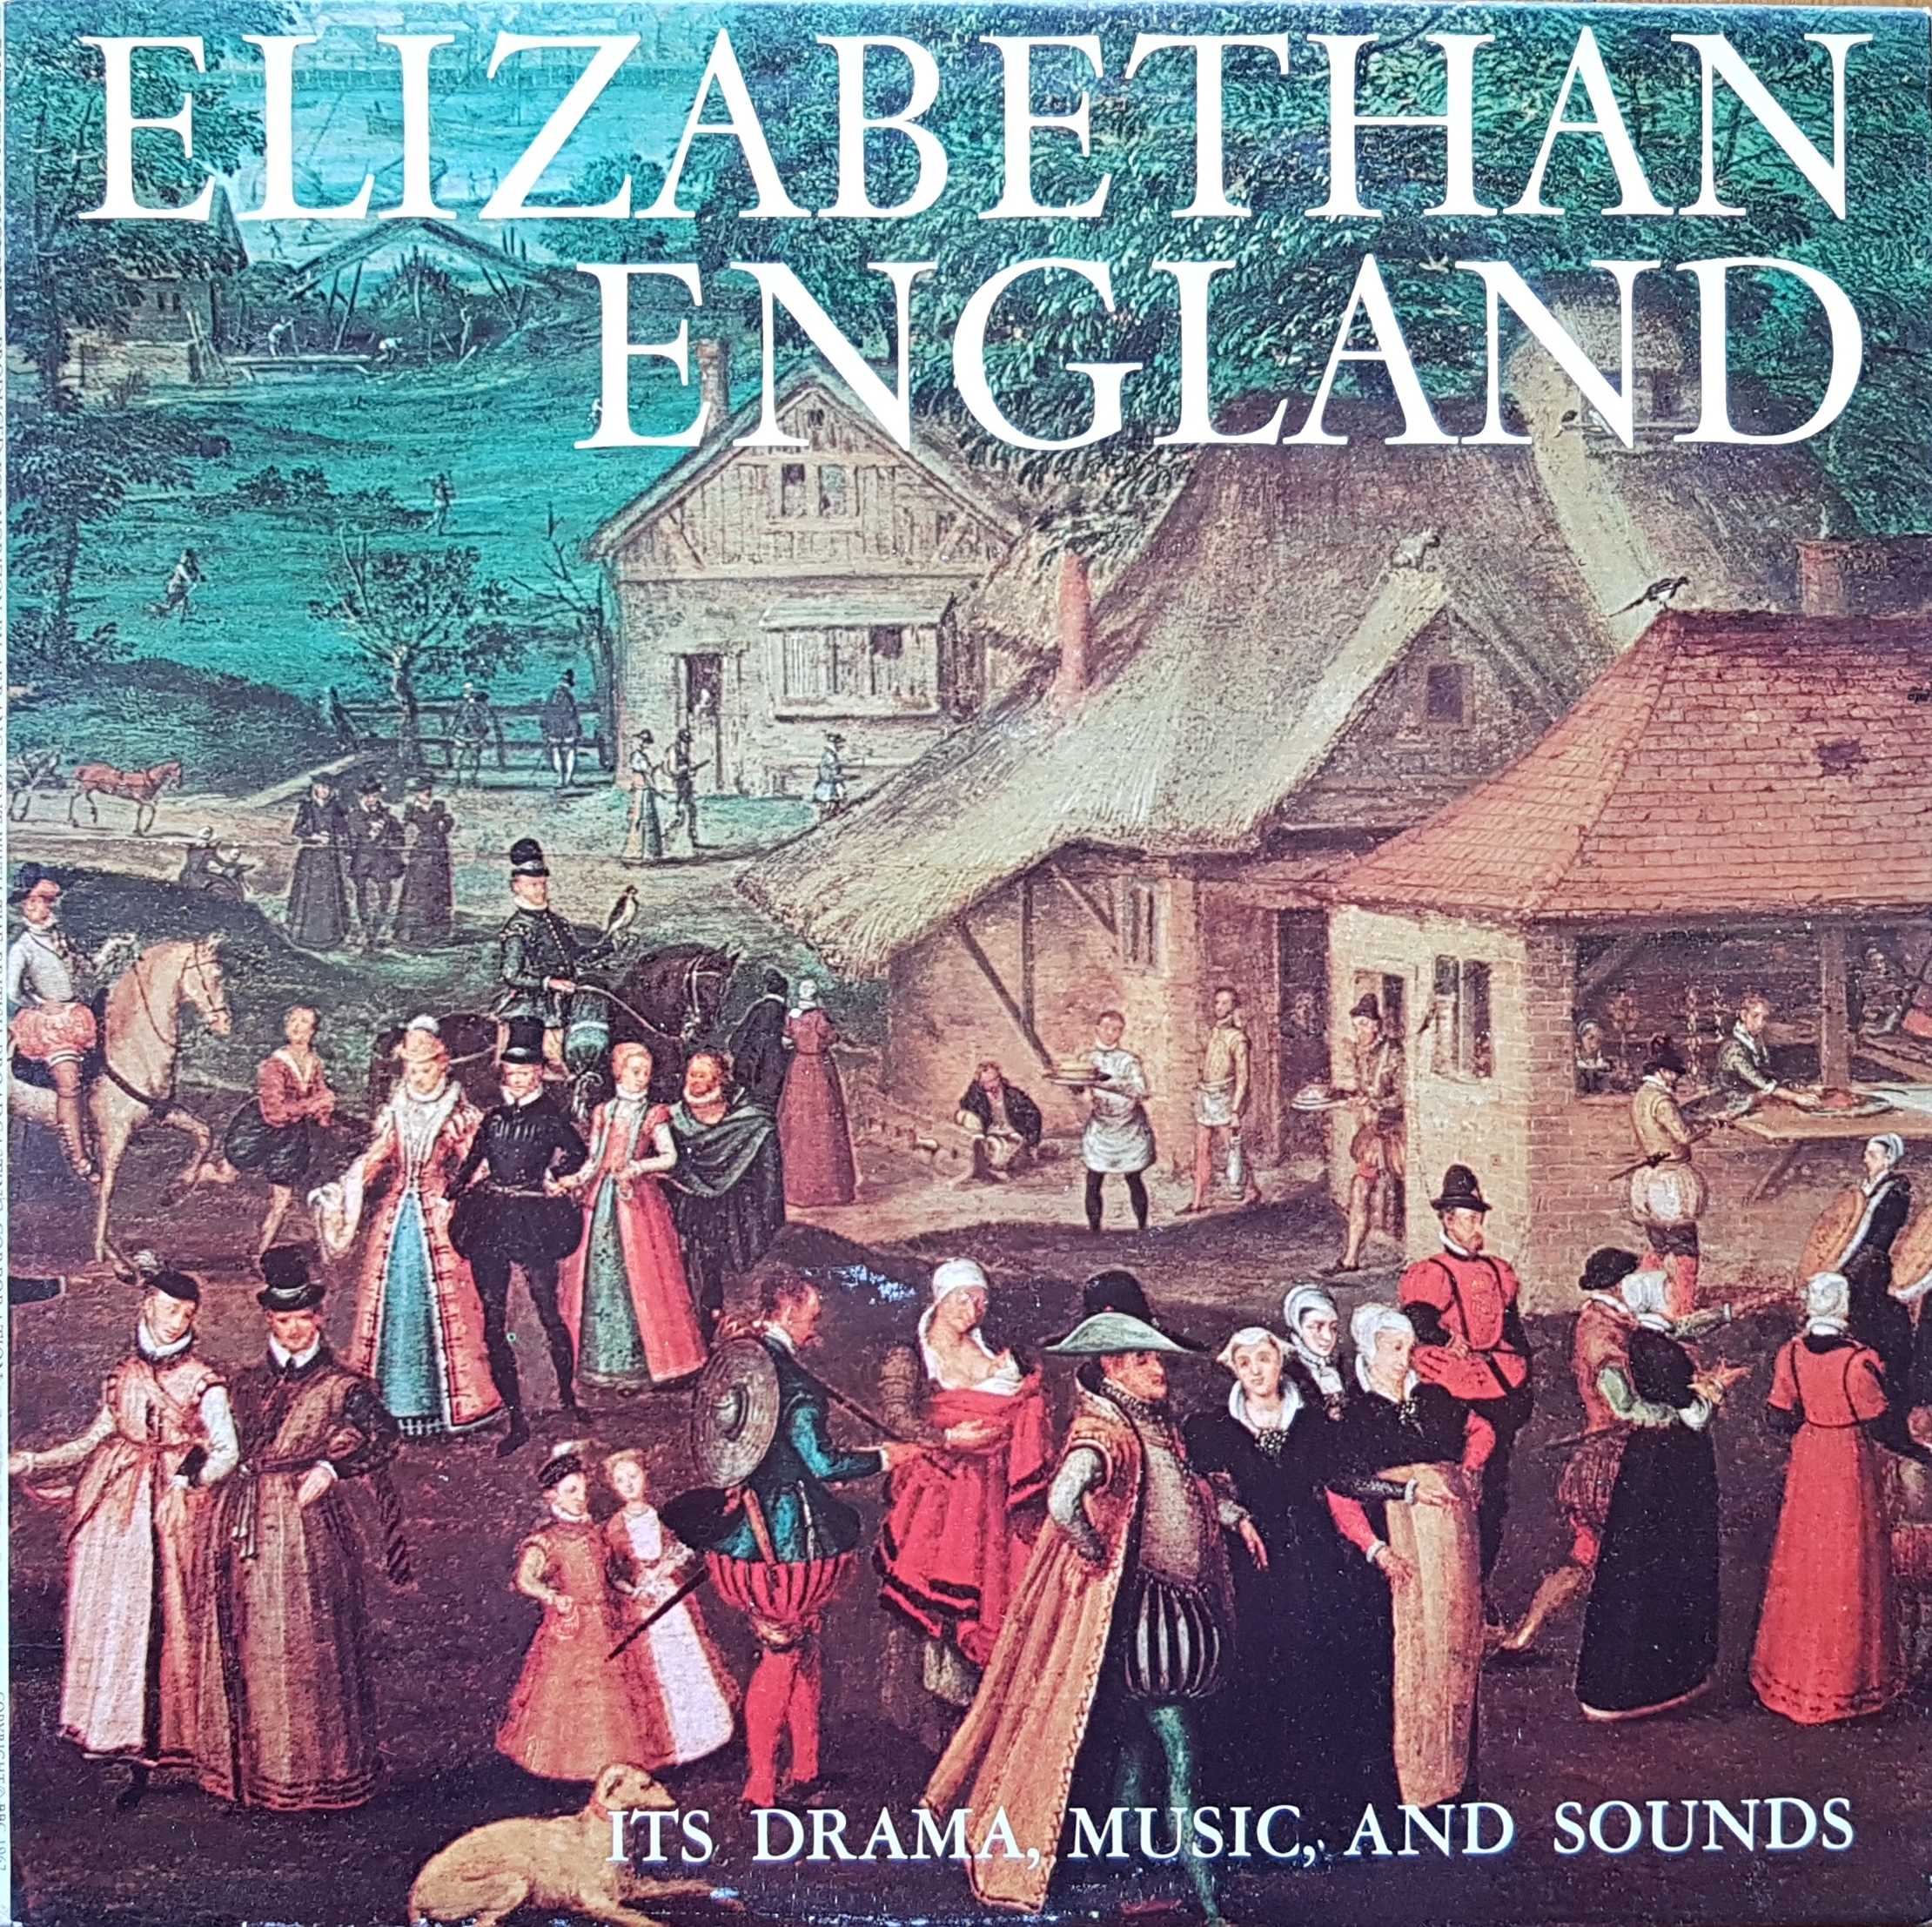 Picture of Elizabethan England by artist Various from the BBC albums - Records and Tapes library